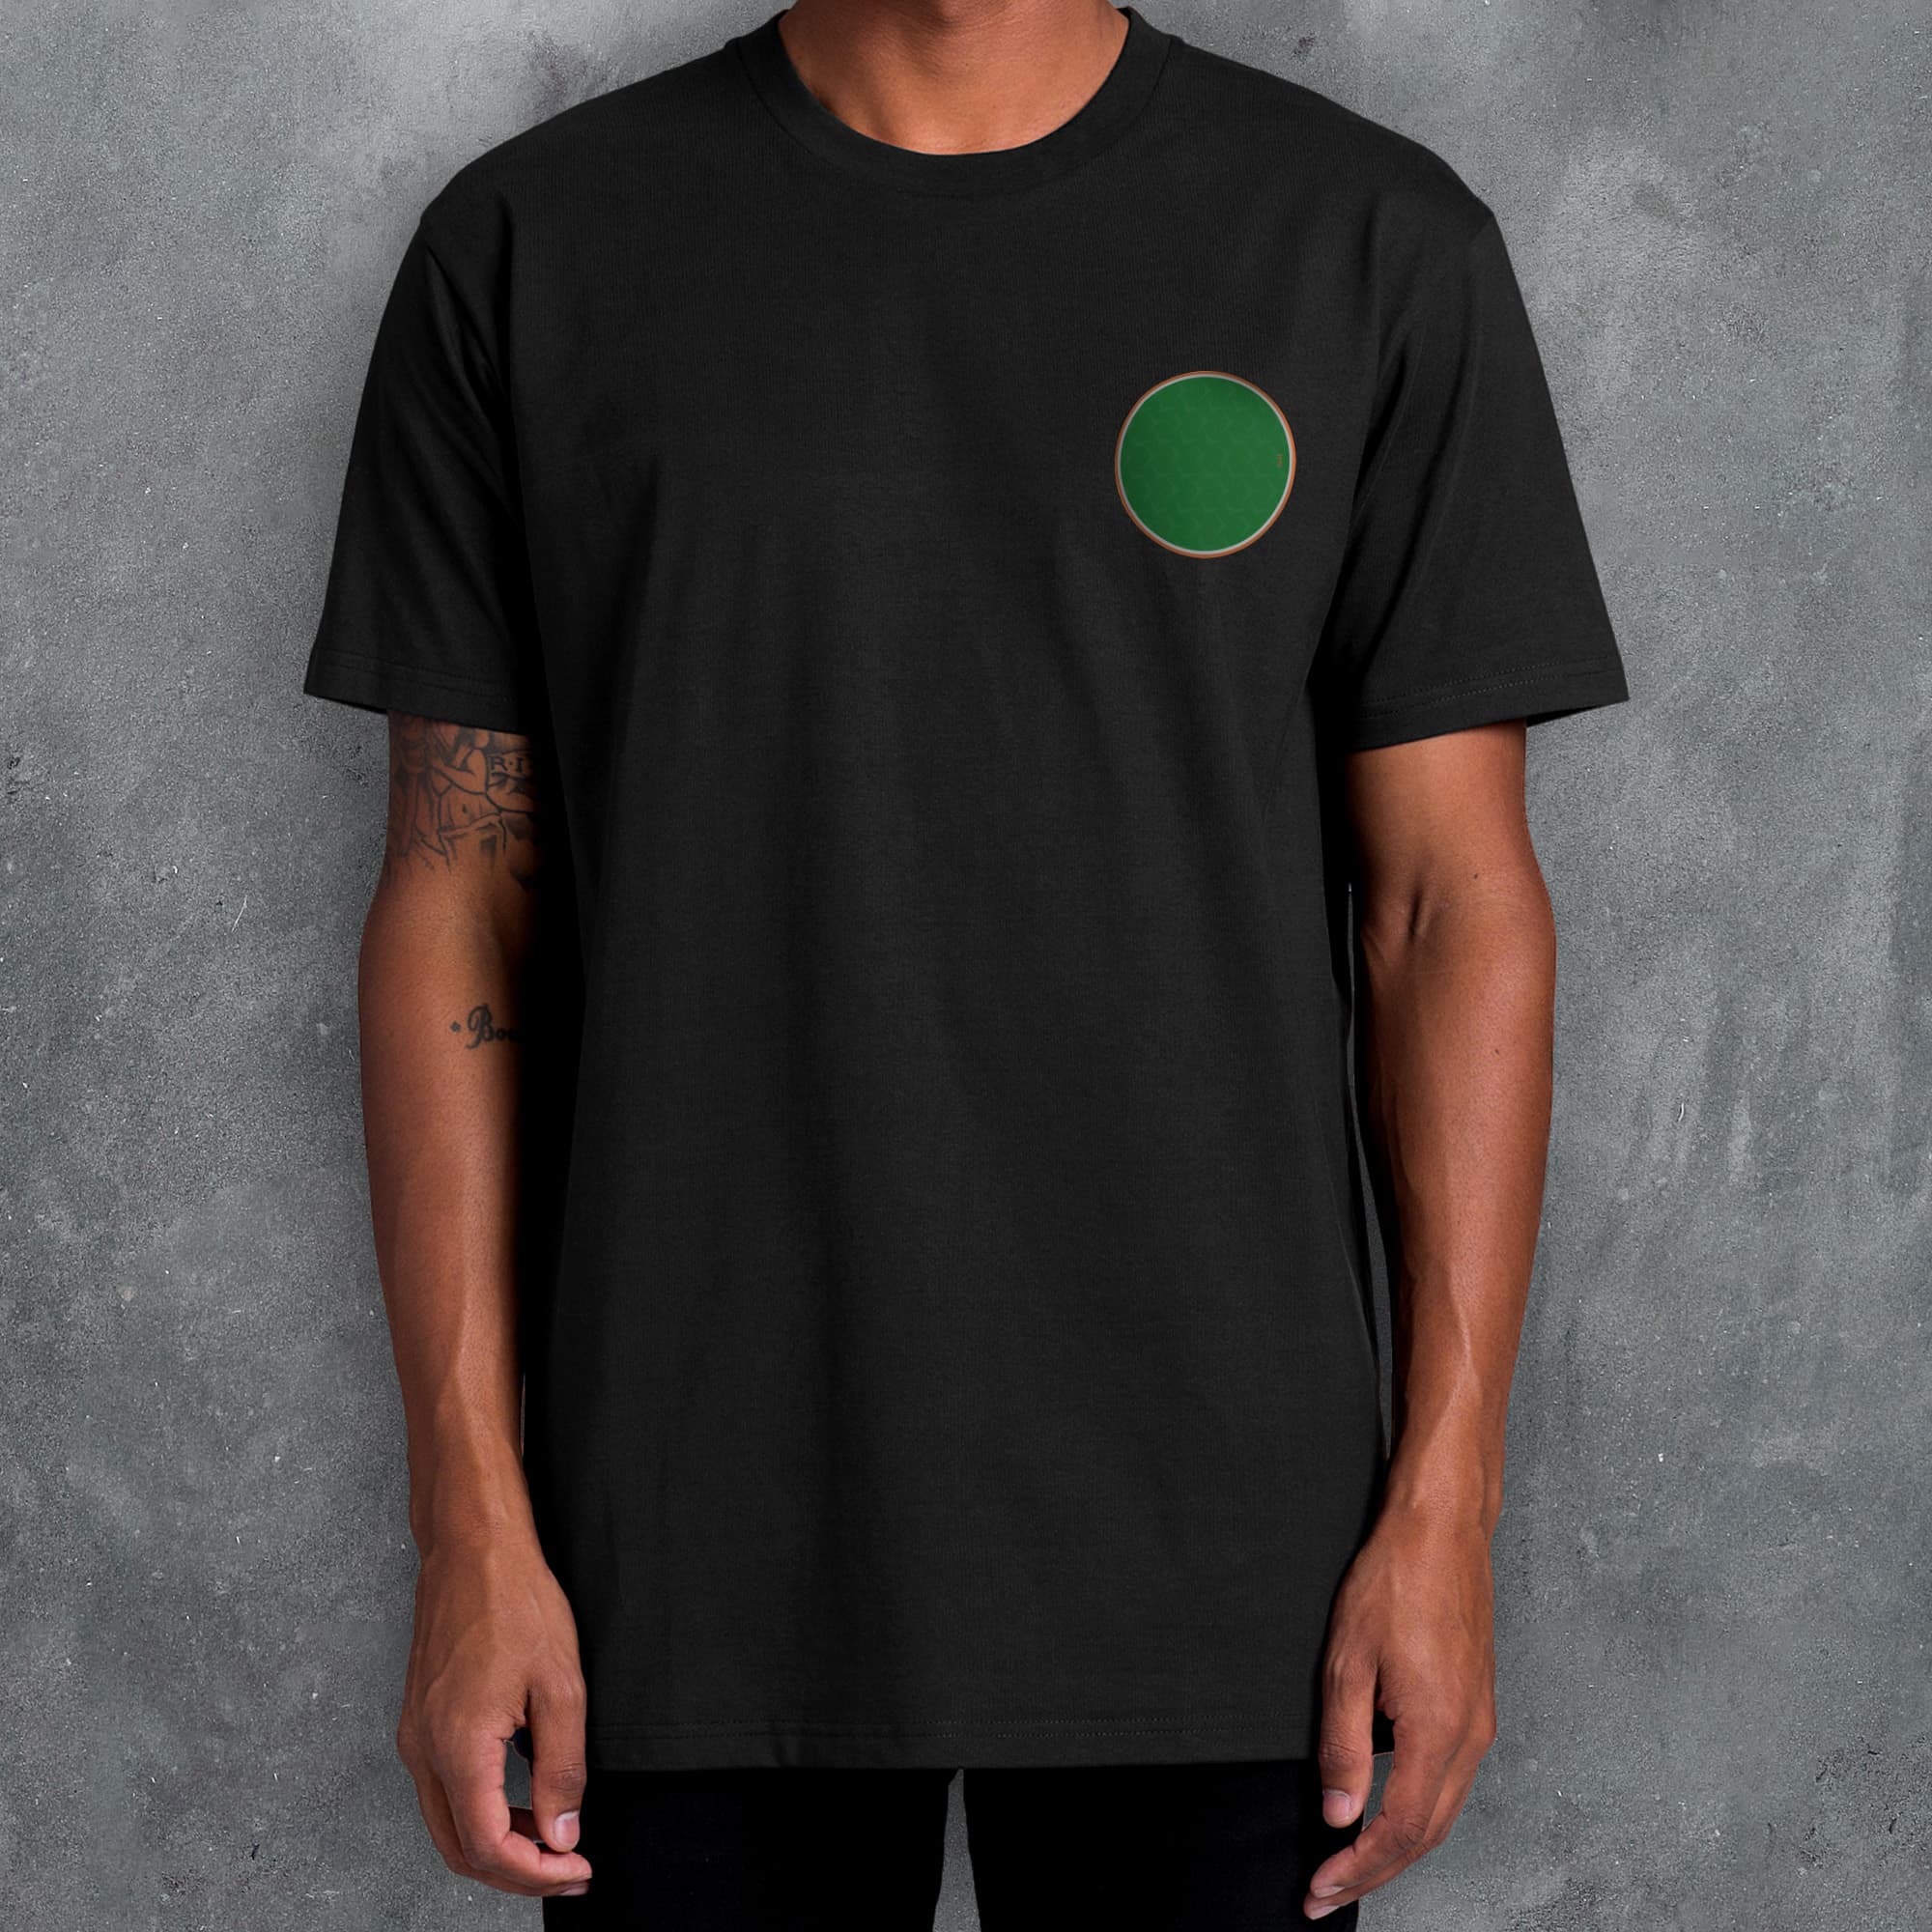 a man wearing a black t - shirt with a green circle on it